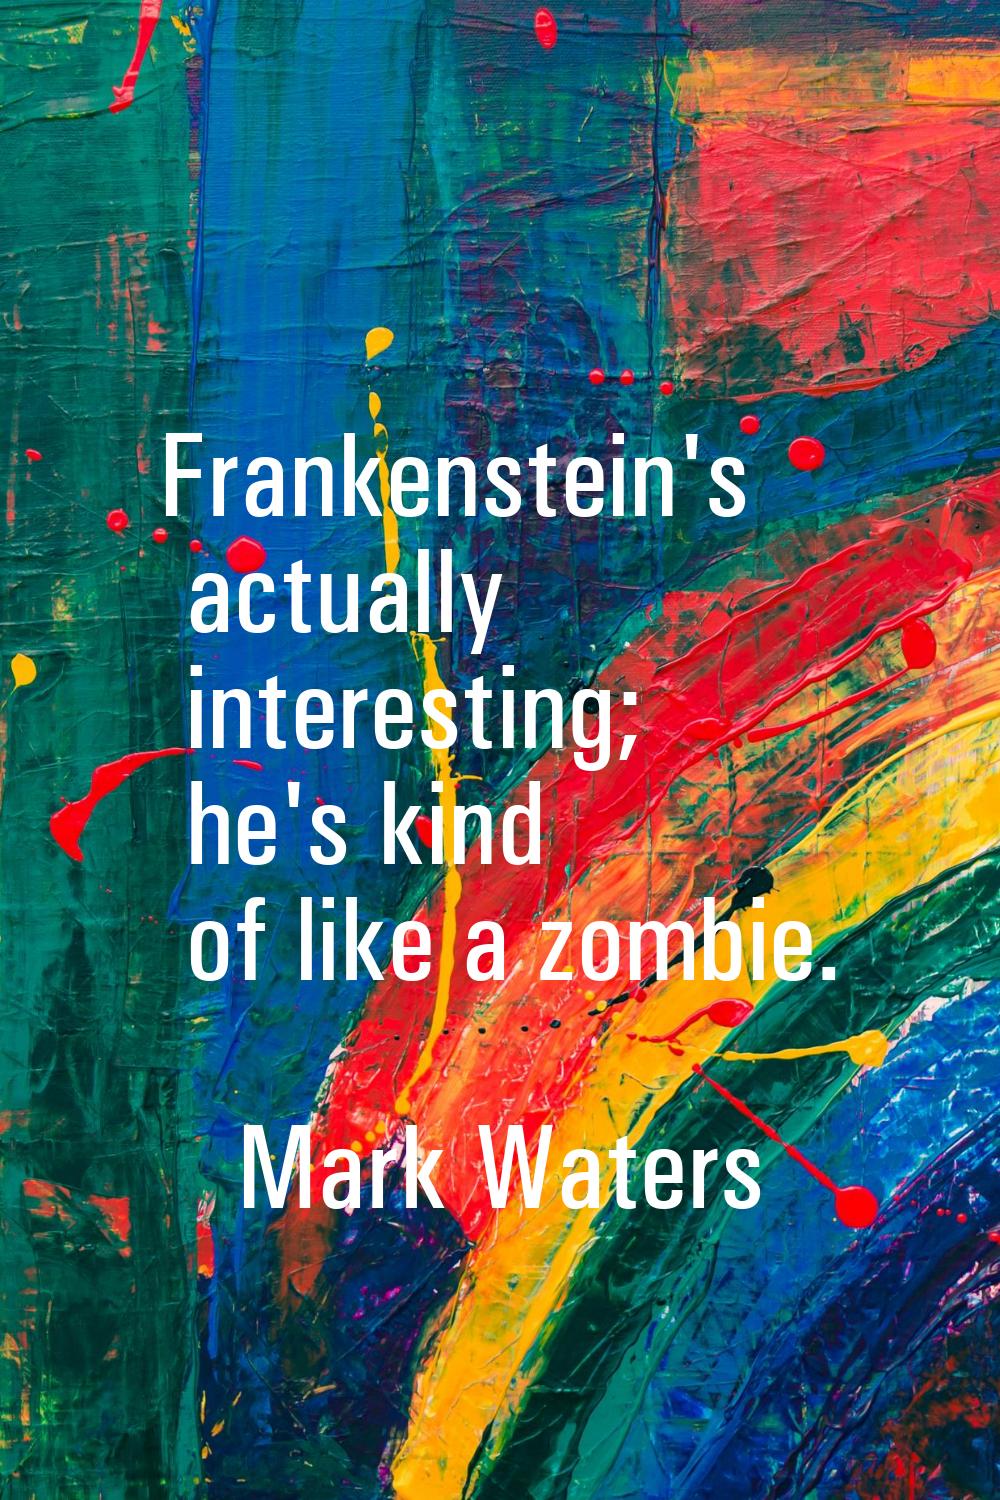 Frankenstein's actually interesting; he's kind of like a zombie.